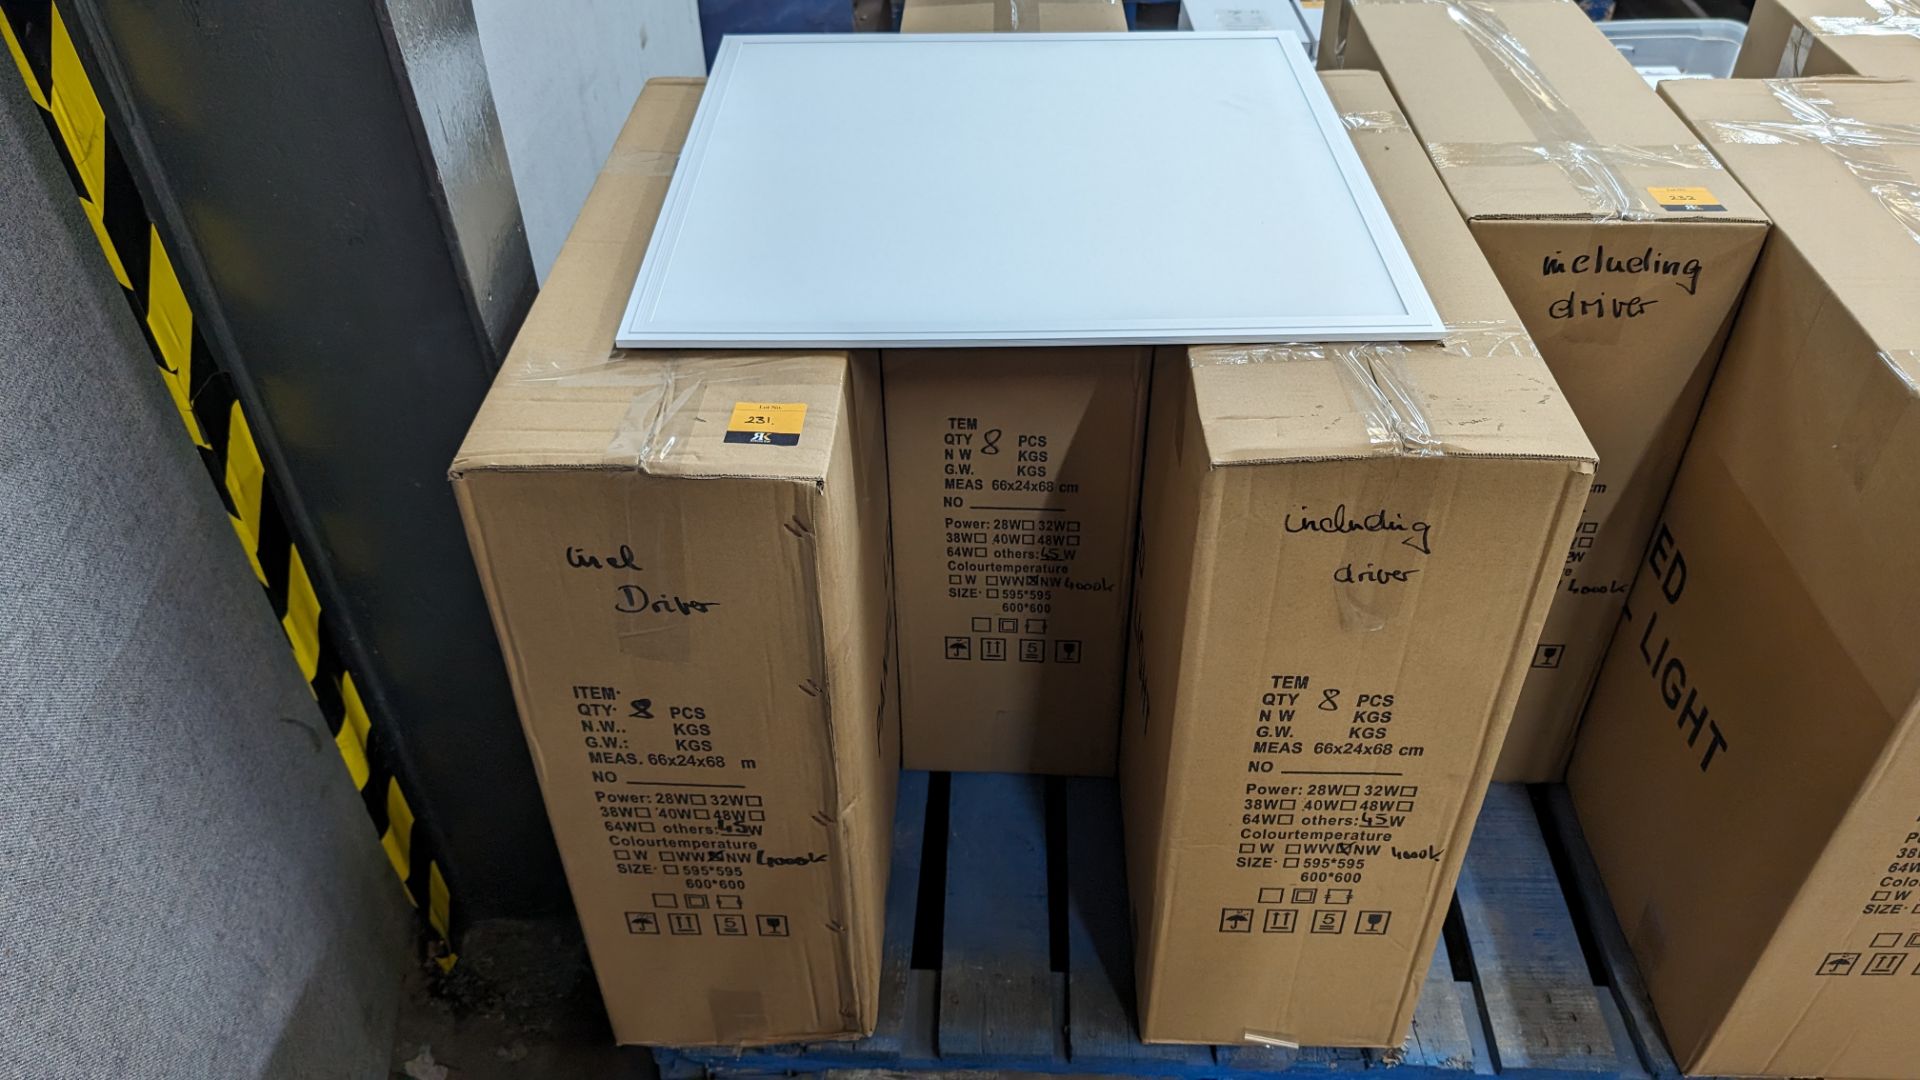 24 off 595mm x 595mm 4000k 45w LED lighting panel, each including driver. This lot comprises 3 cart